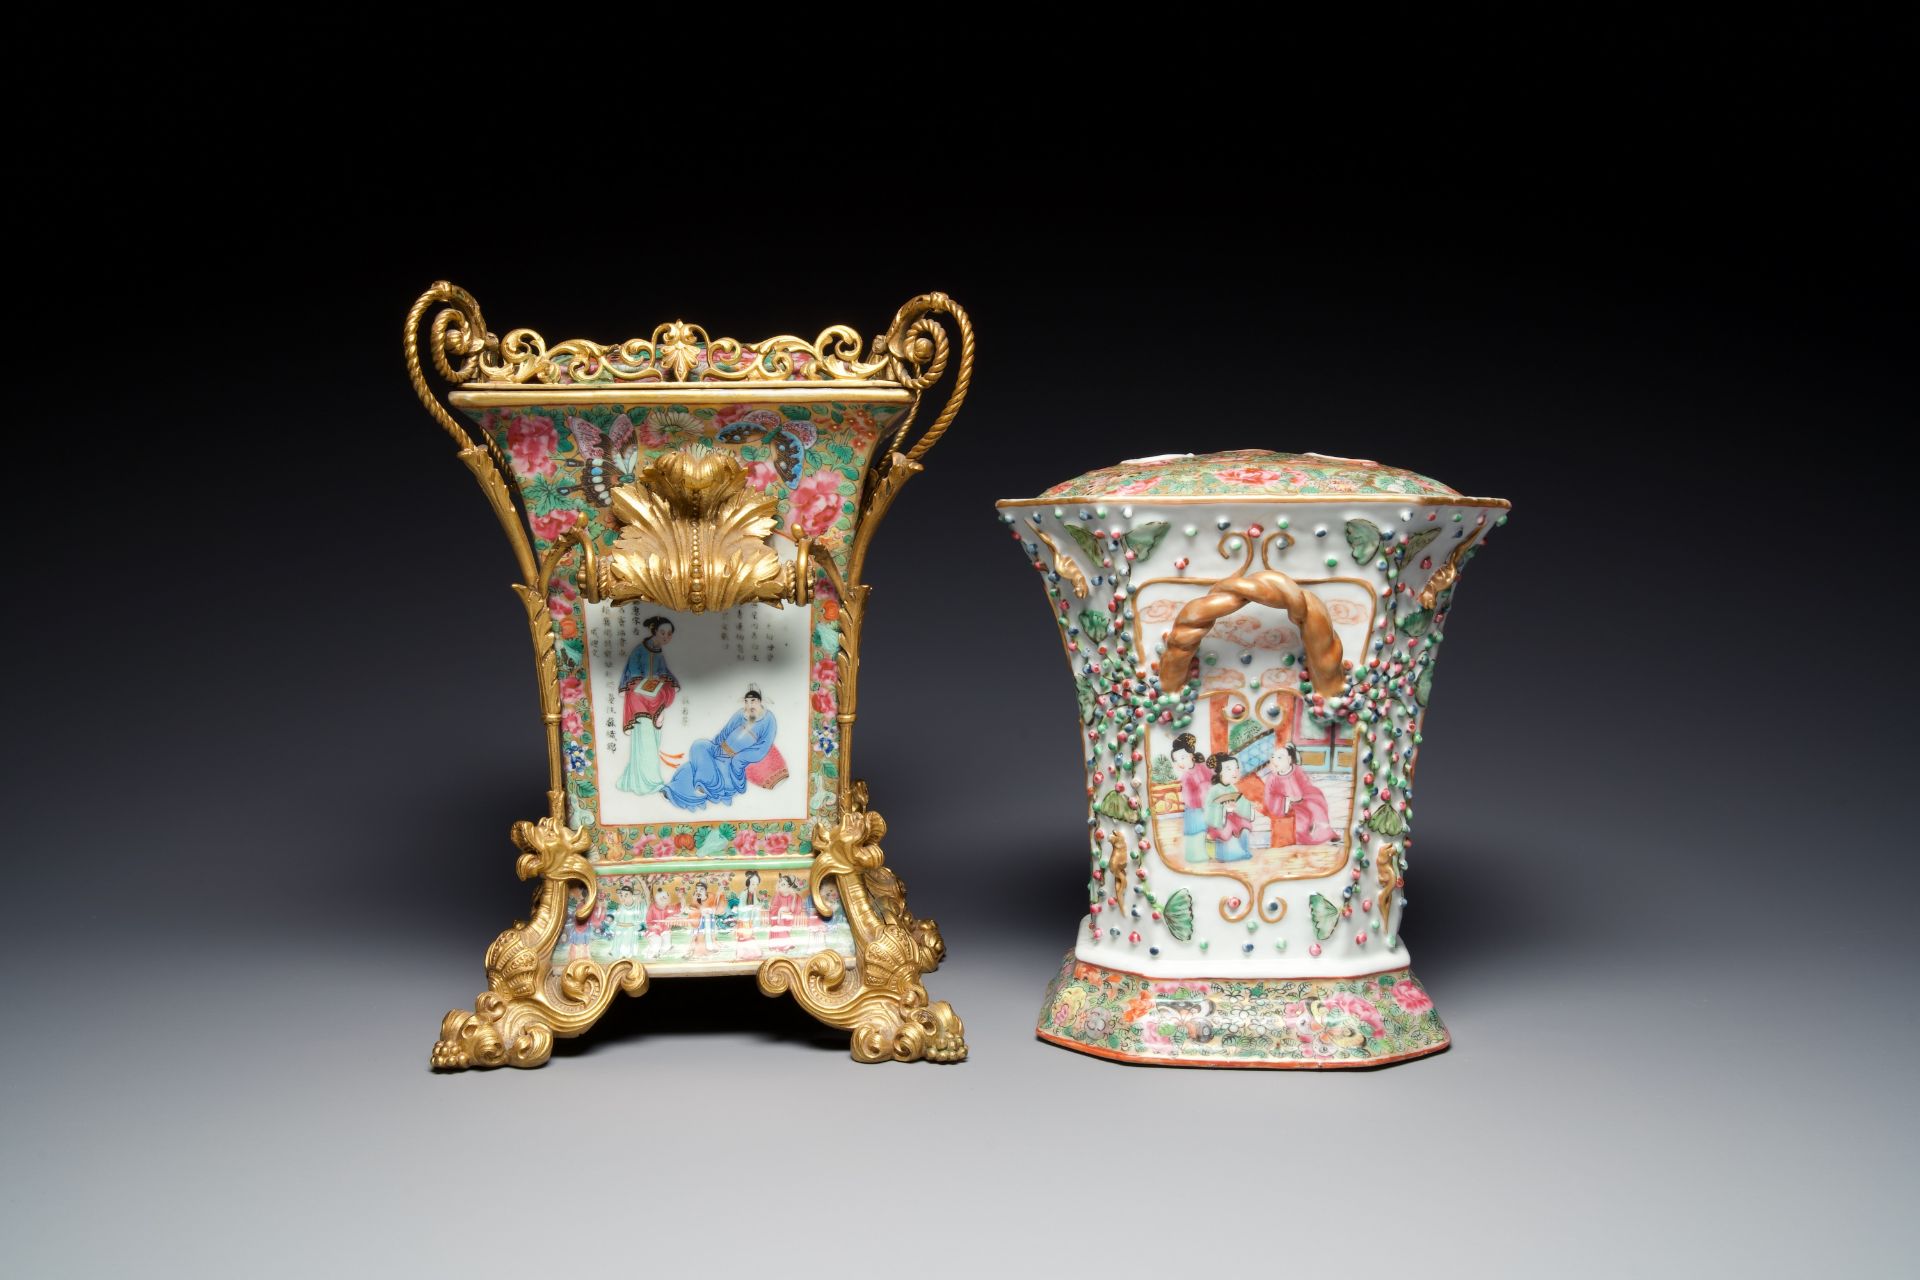 Two fine Chinese Canton famille rose flower holders, one with a gilt bronze mount, 19th C. - Image 5 of 7